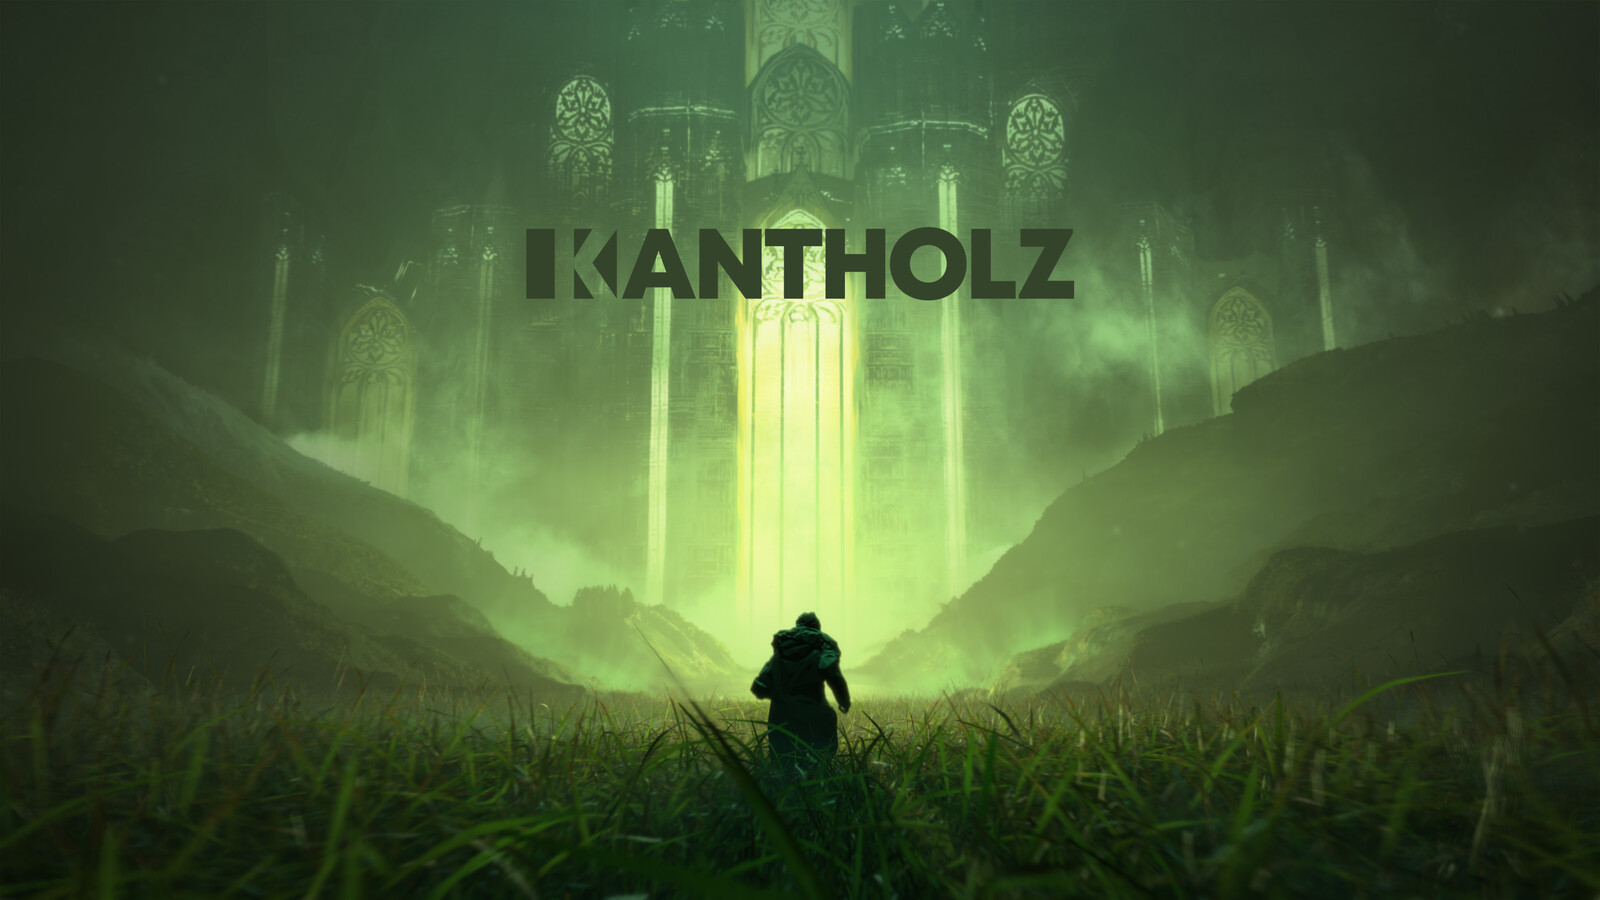 music video for "zwiespalt" by Kantholz